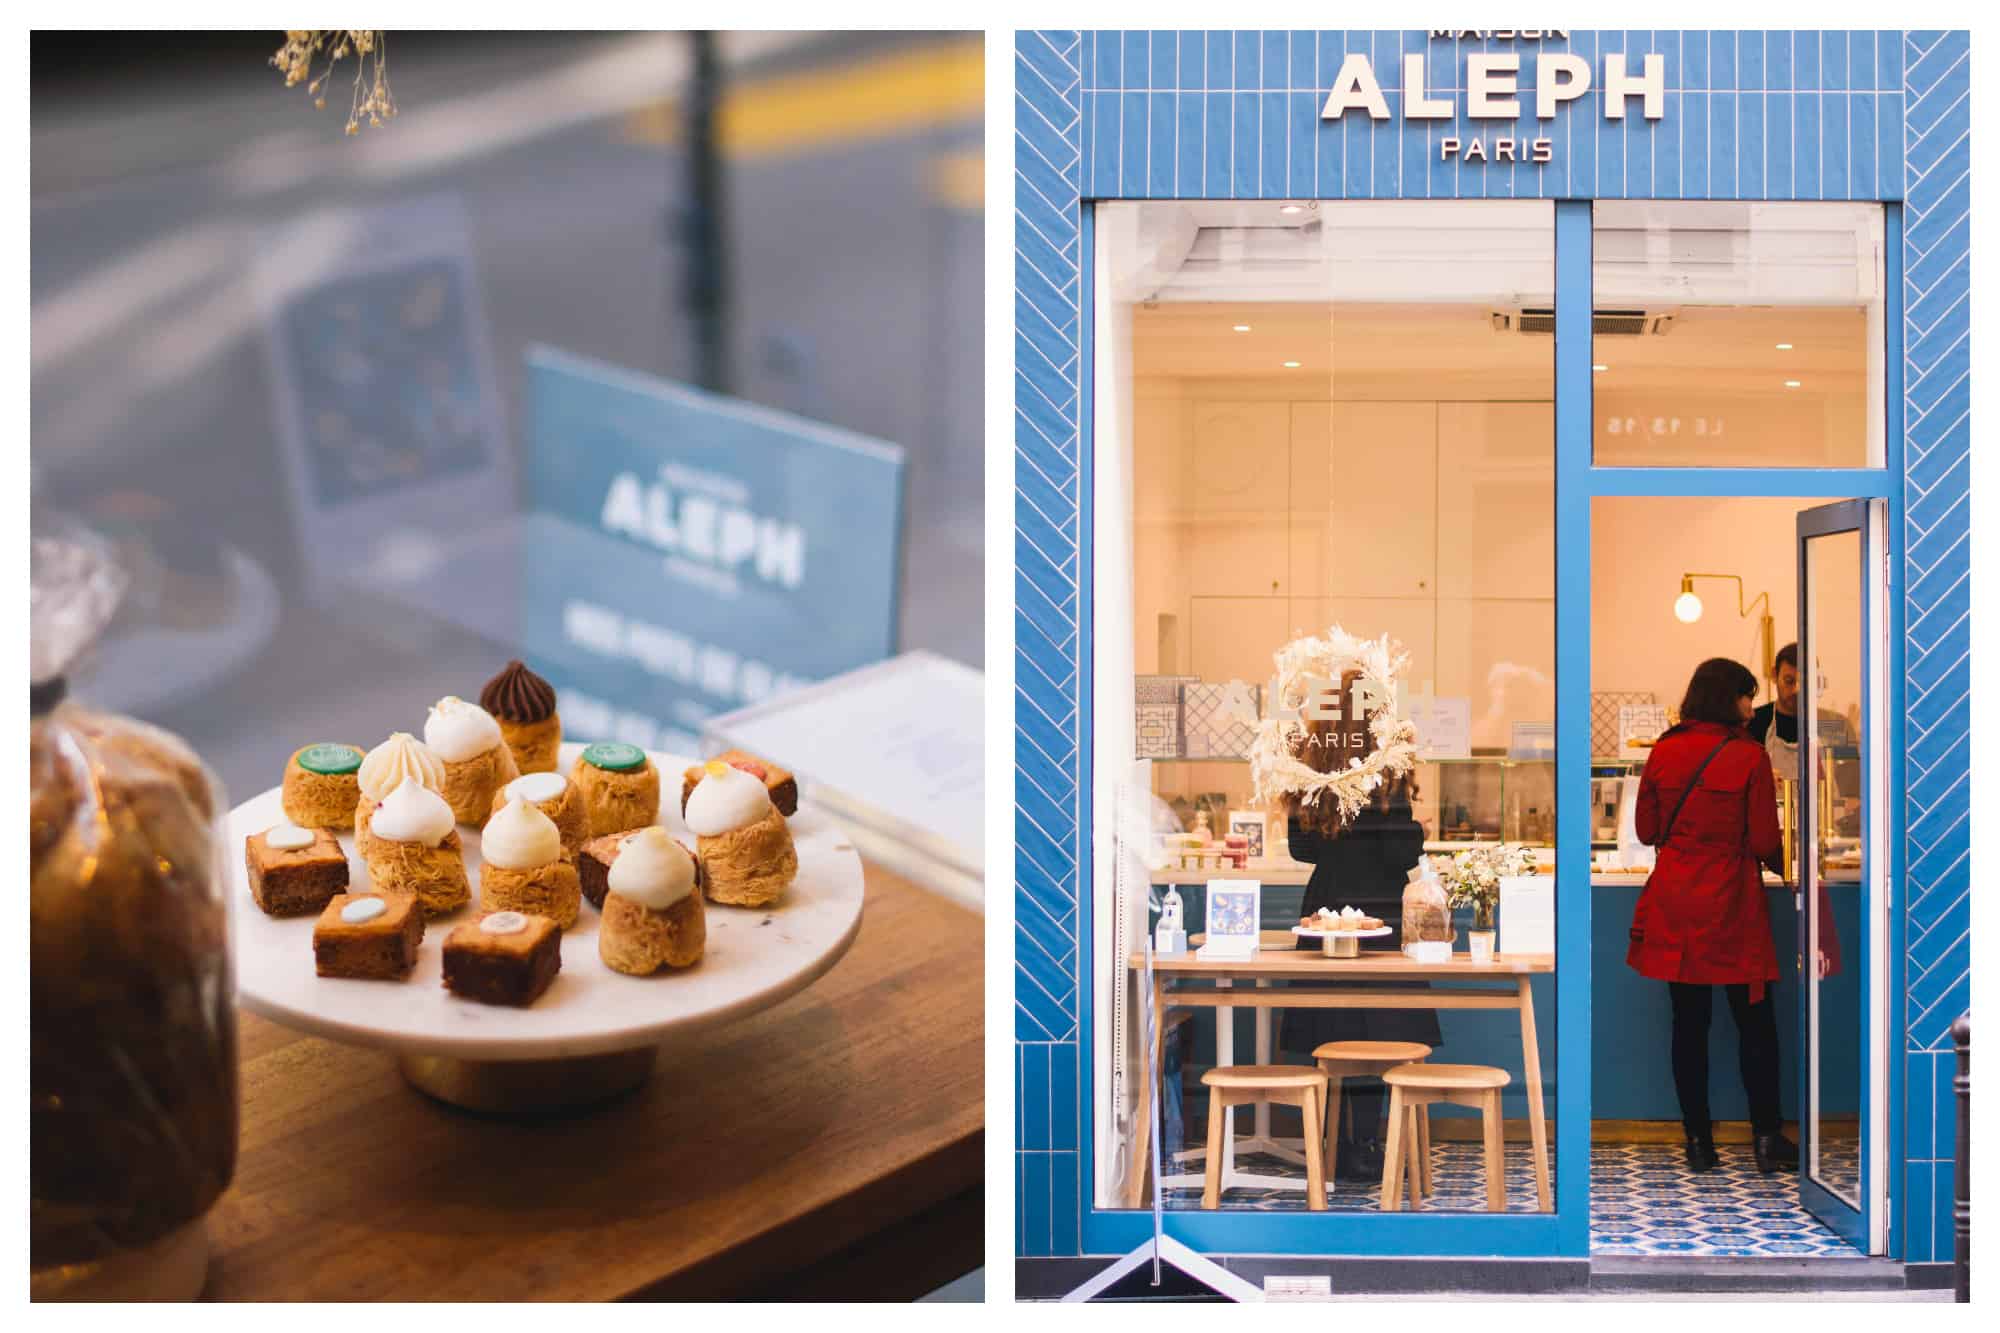 On left: A plate of miniature pastries sit in a sunlit window of Maison Aleph. Called nids, they are shaped like birds' nests and topped with fruit confit and whipped cream. On right: the sky-blue facade of Maison Aleph in Paris invites people to step inside for a treat. 